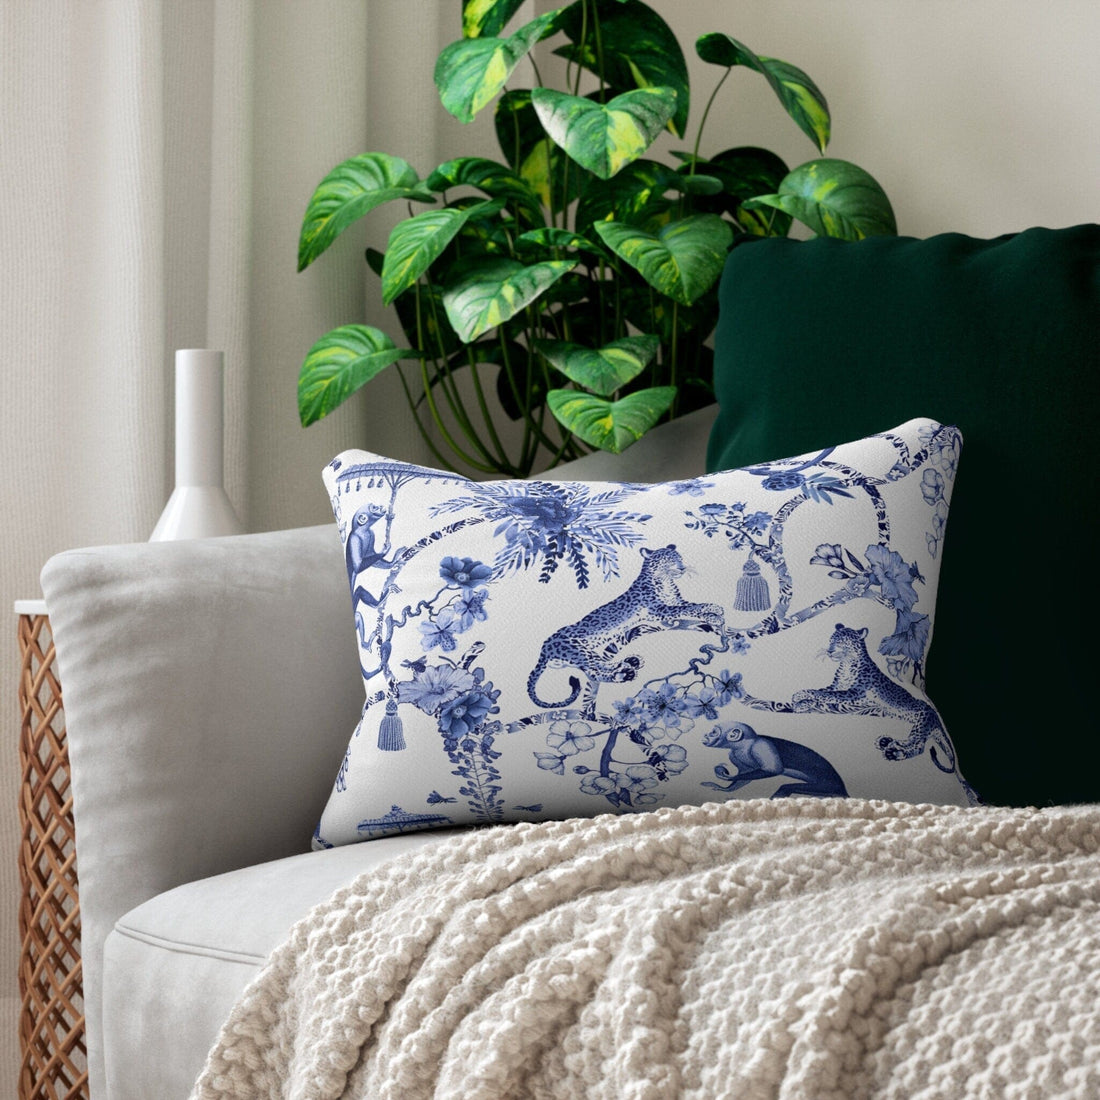 Kate McEnroe New York Chinoiserie Lumbar Pillow, Botanical Toile Bedding Collection, Floral Blue and White Chinoiserie Toile Throw Pillow with InsertThrow Pillows28157272031391349351